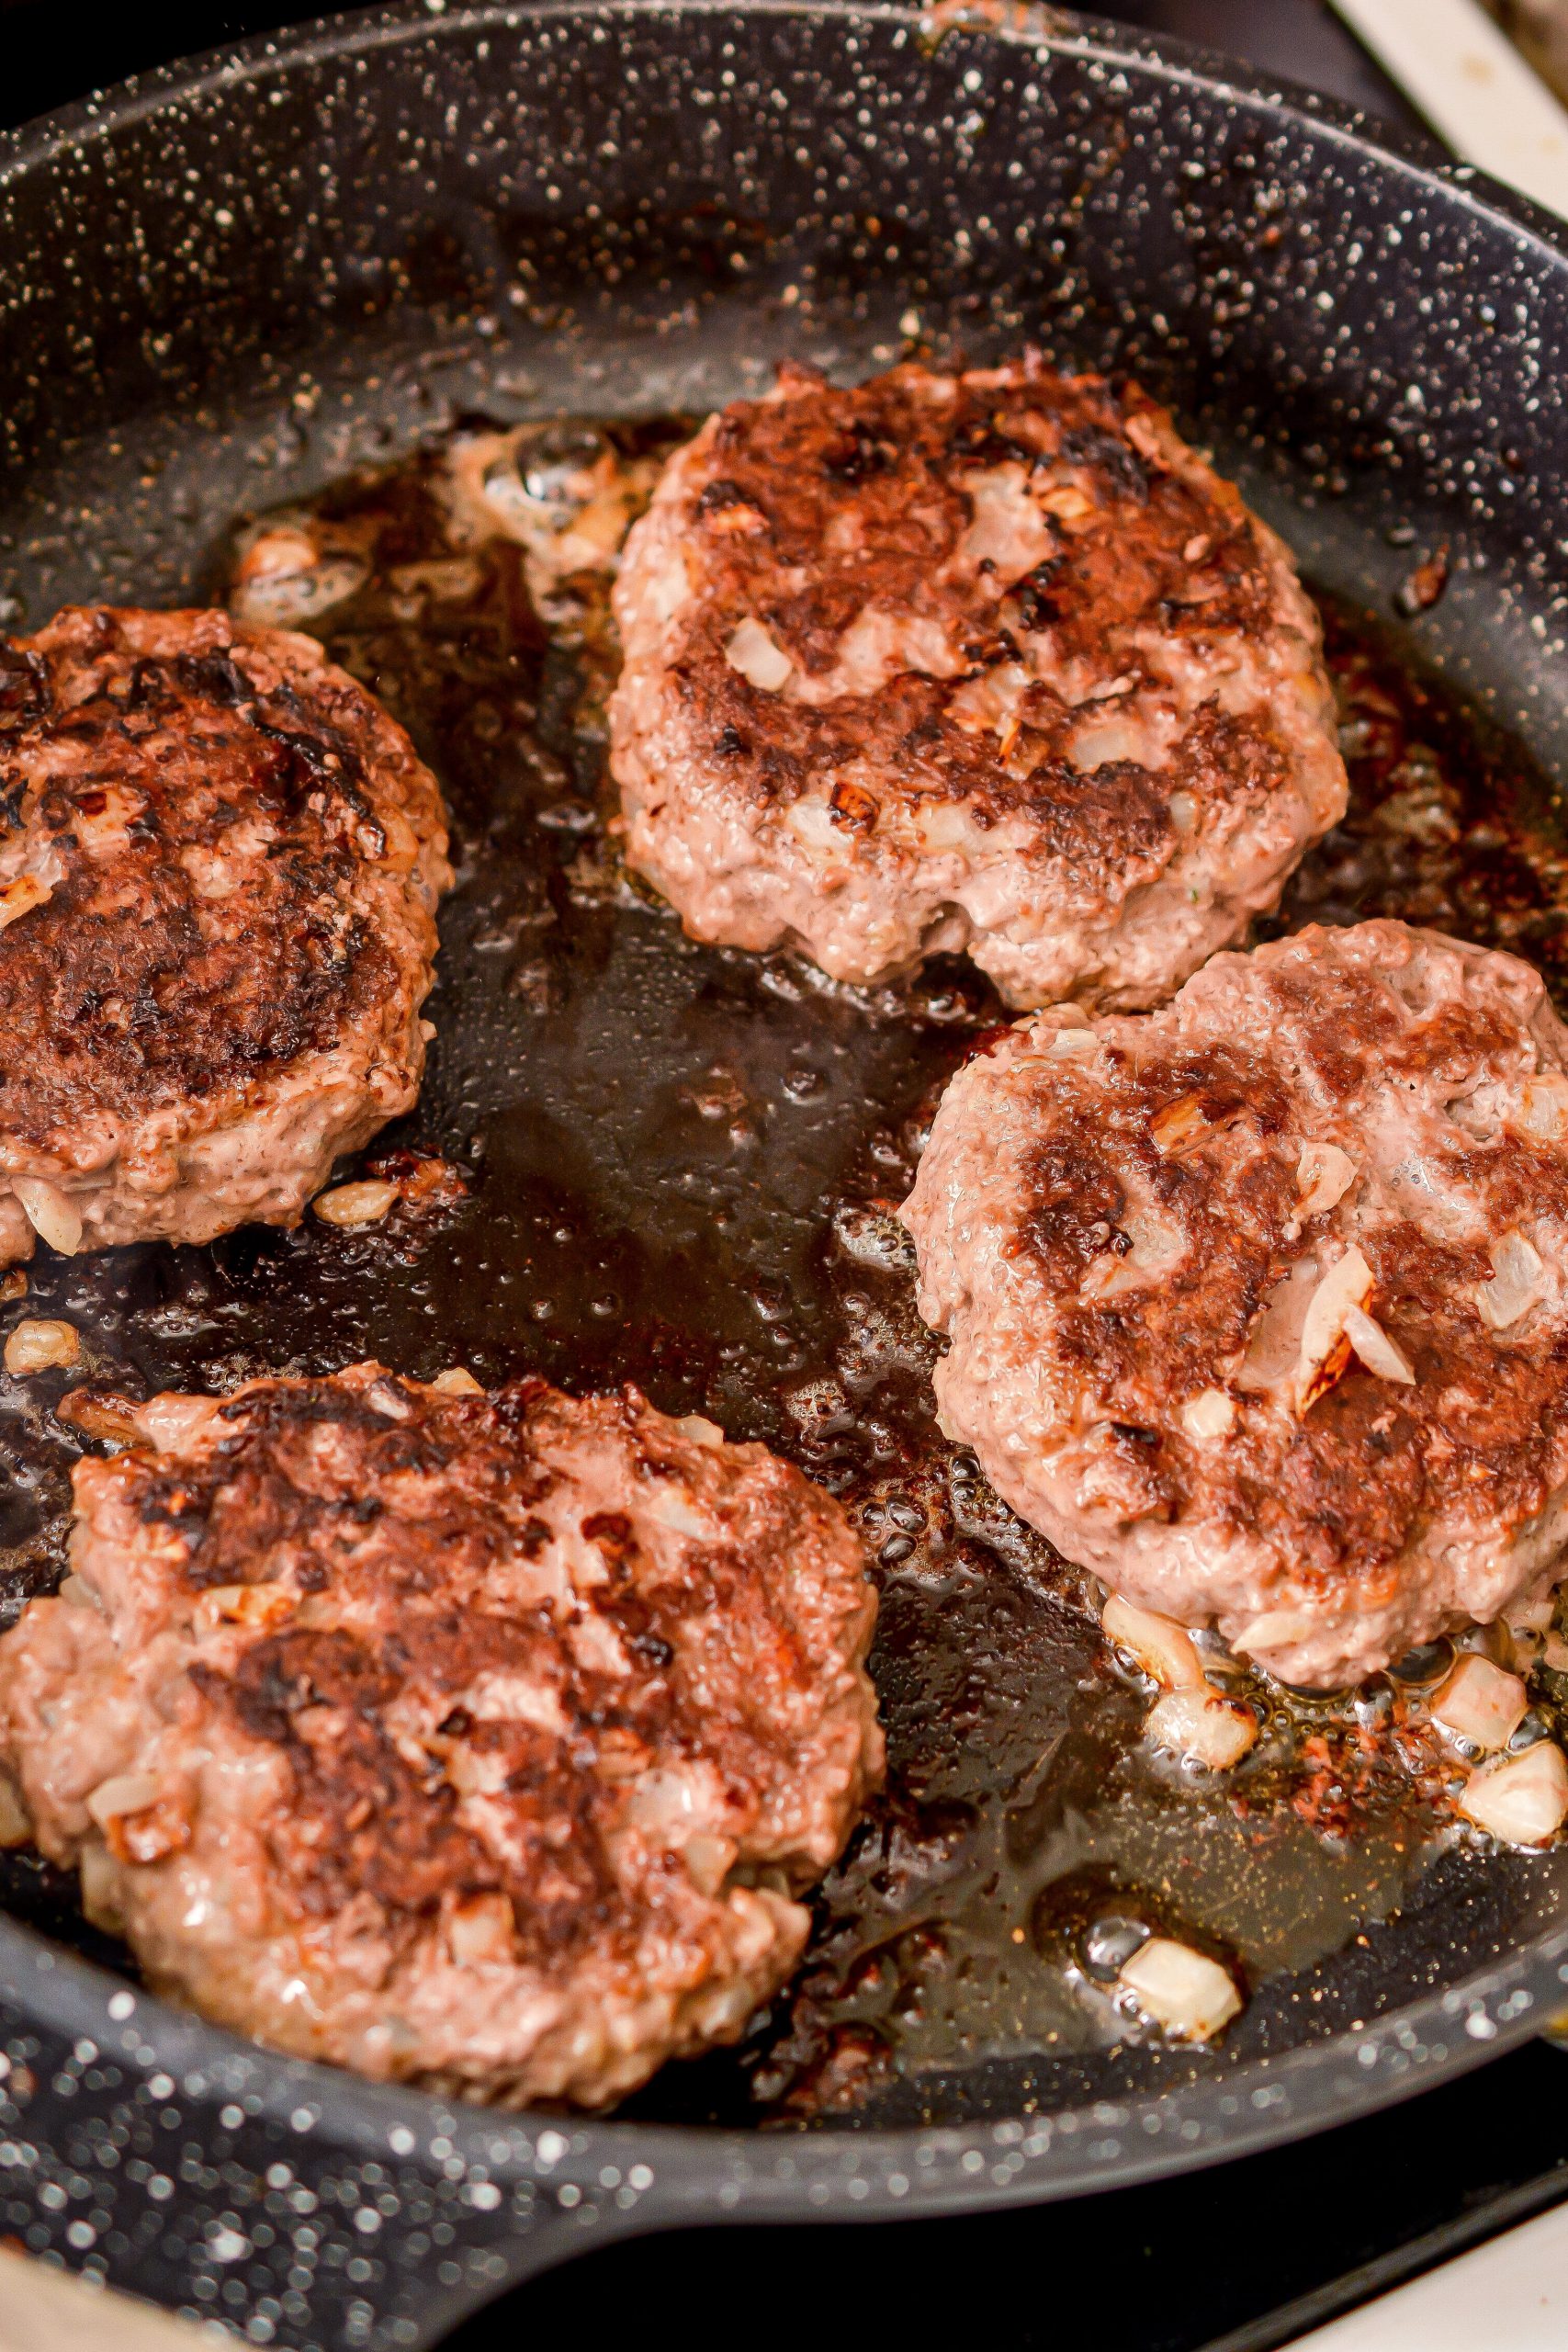 Form the meat into four even patties and place into the heated skillet. Saute until browned on both sides and cooked through. Remove the patties from the skillet and place them on the side for later.